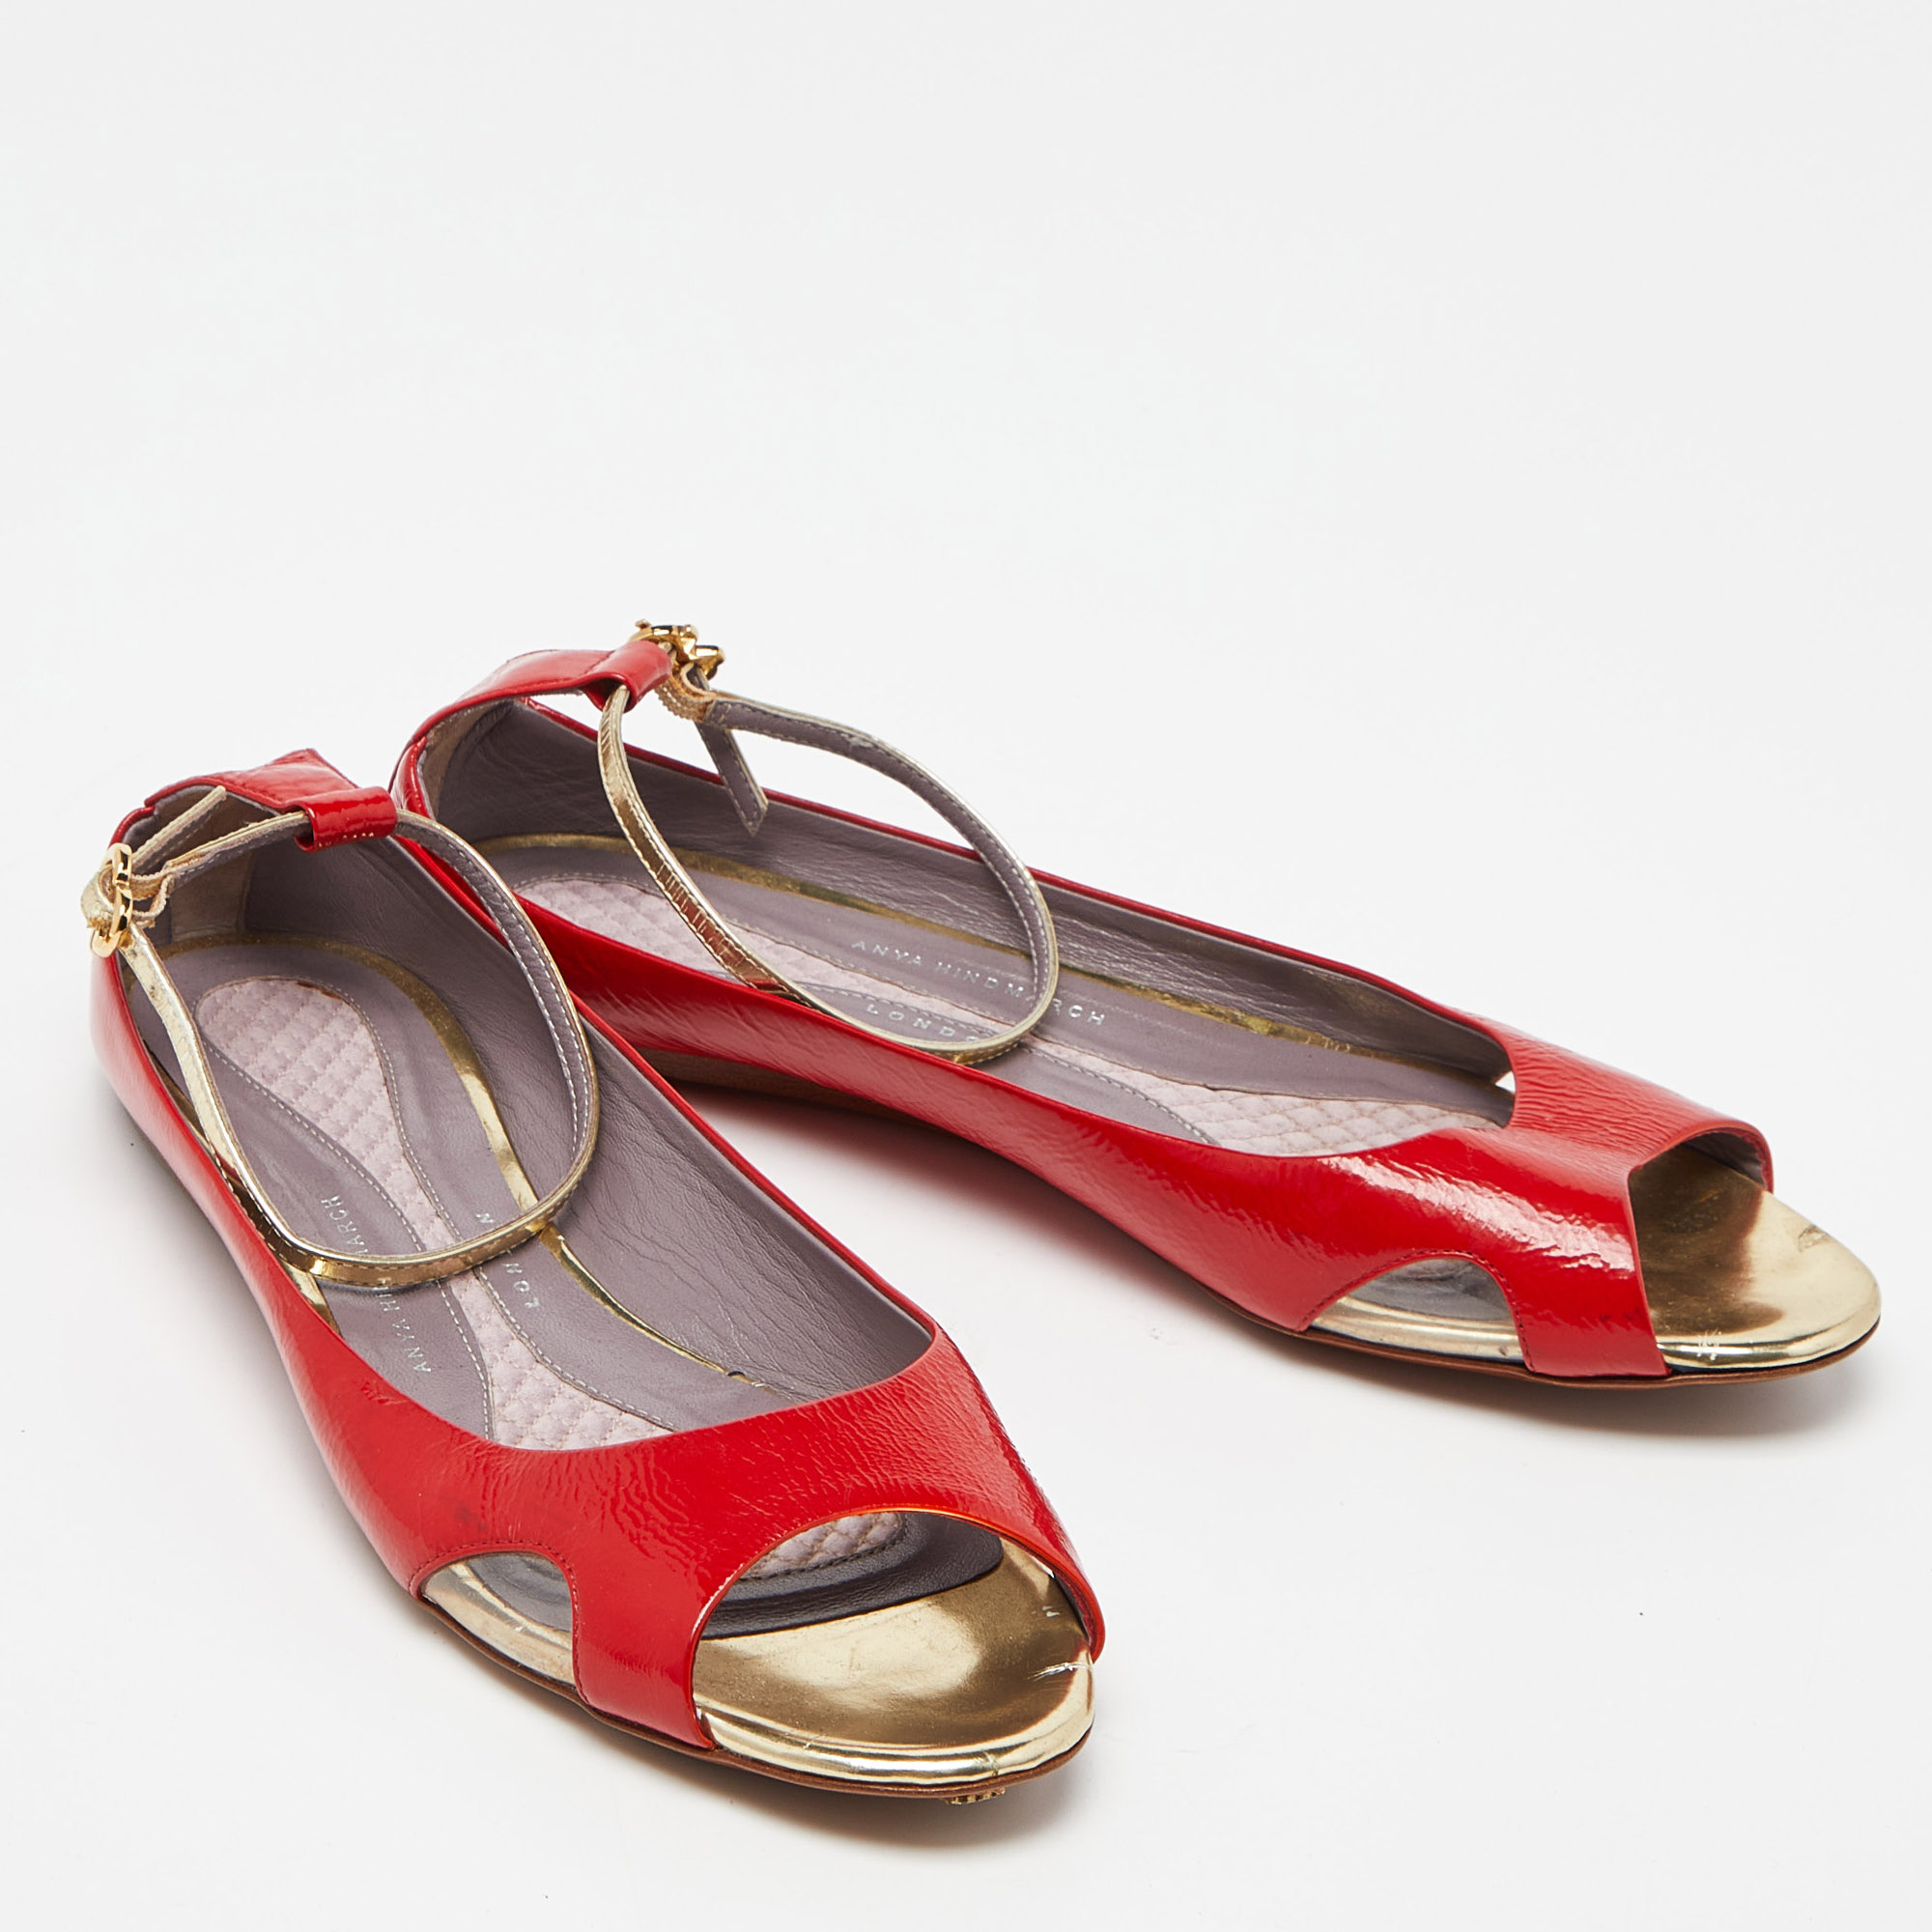 Anya Hindmarch Red Patent Leather Open Toe Ankle Strap Flats Size 39